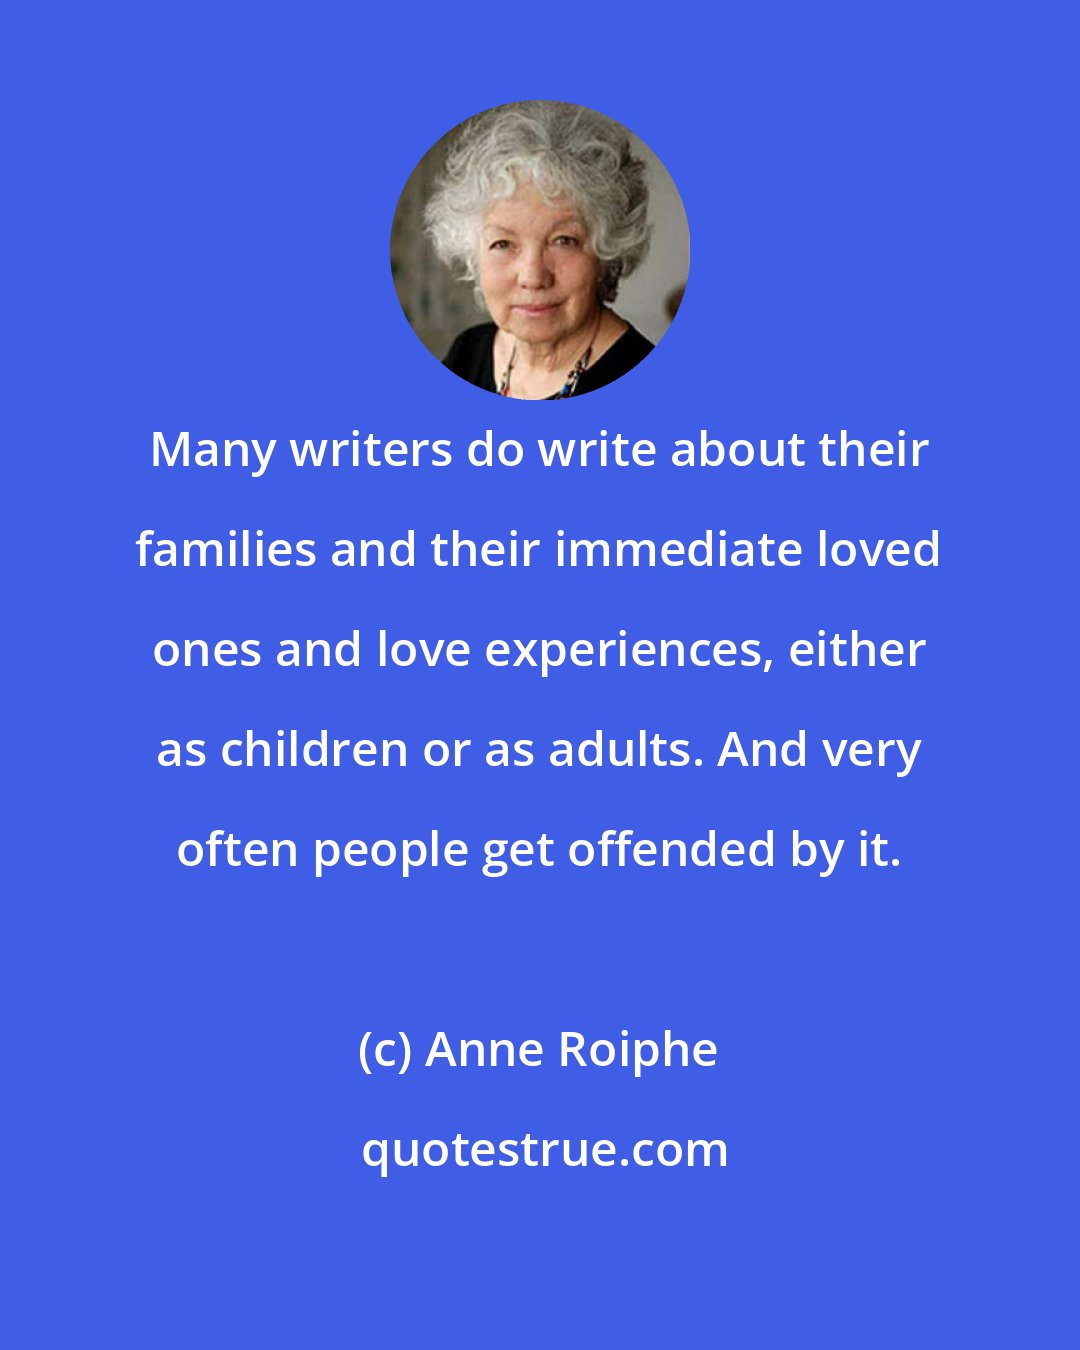 Anne Roiphe: Many writers do write about their families and their immediate loved ones and love experiences, either as children or as adults. And very often people get offended by it.